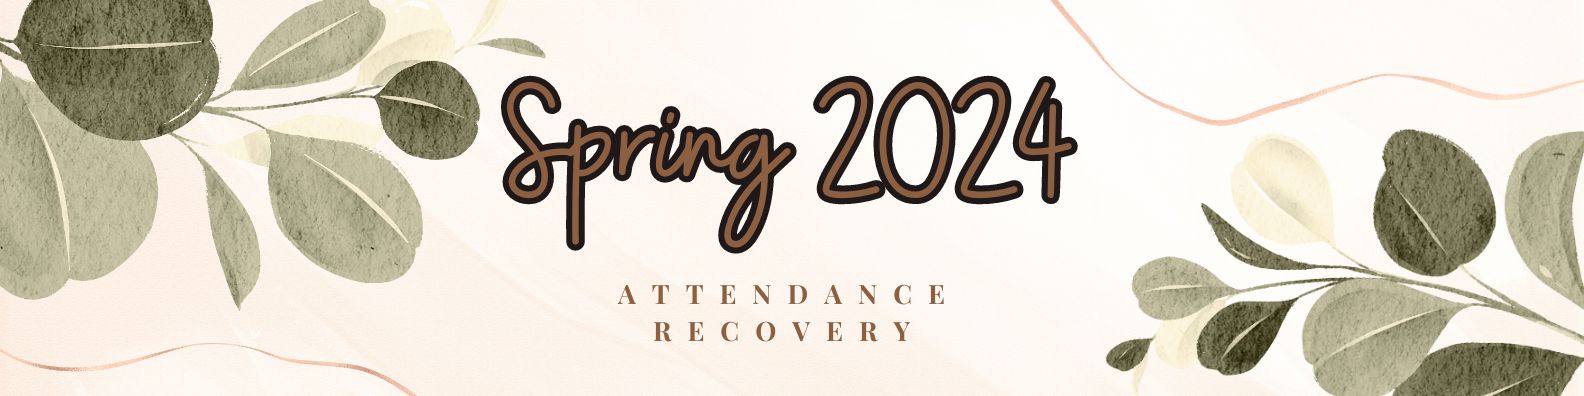 Spring 2024 Attendance Recovery